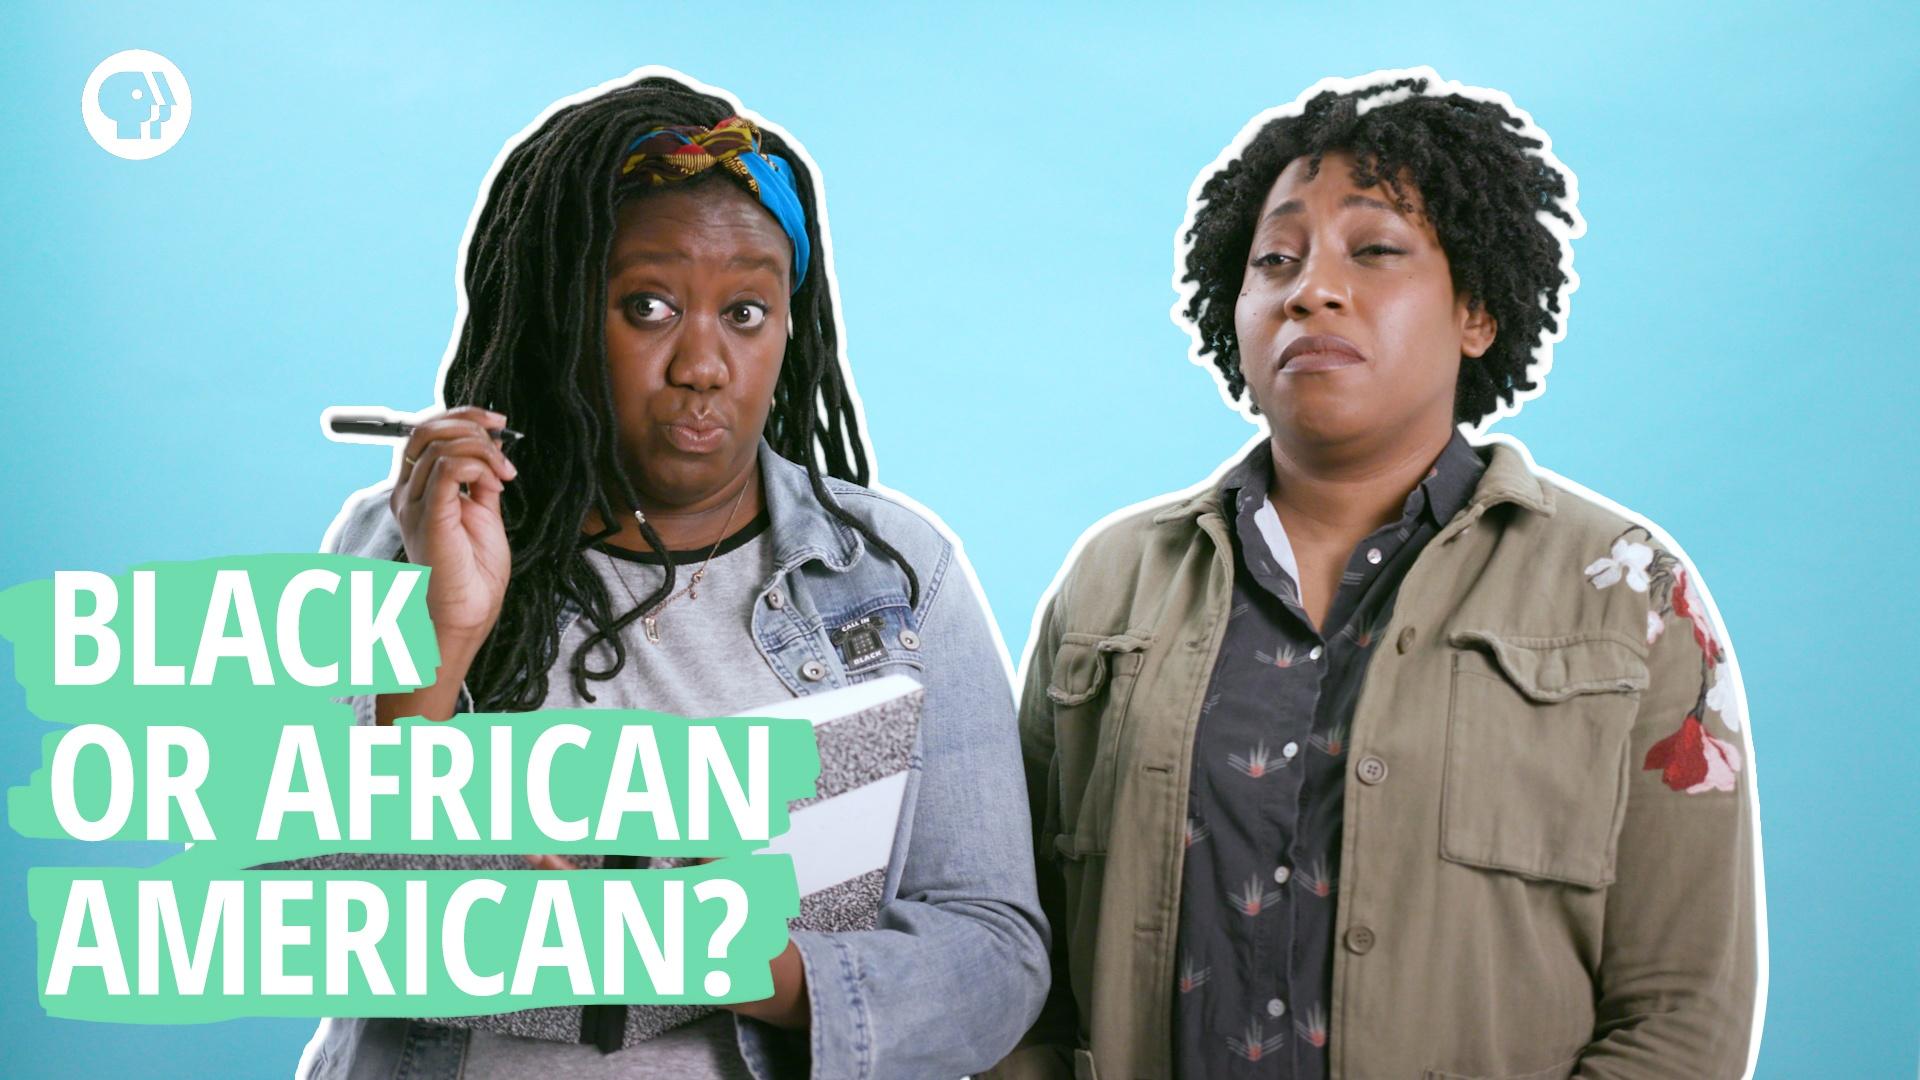 Are You "Black" or "African American?"